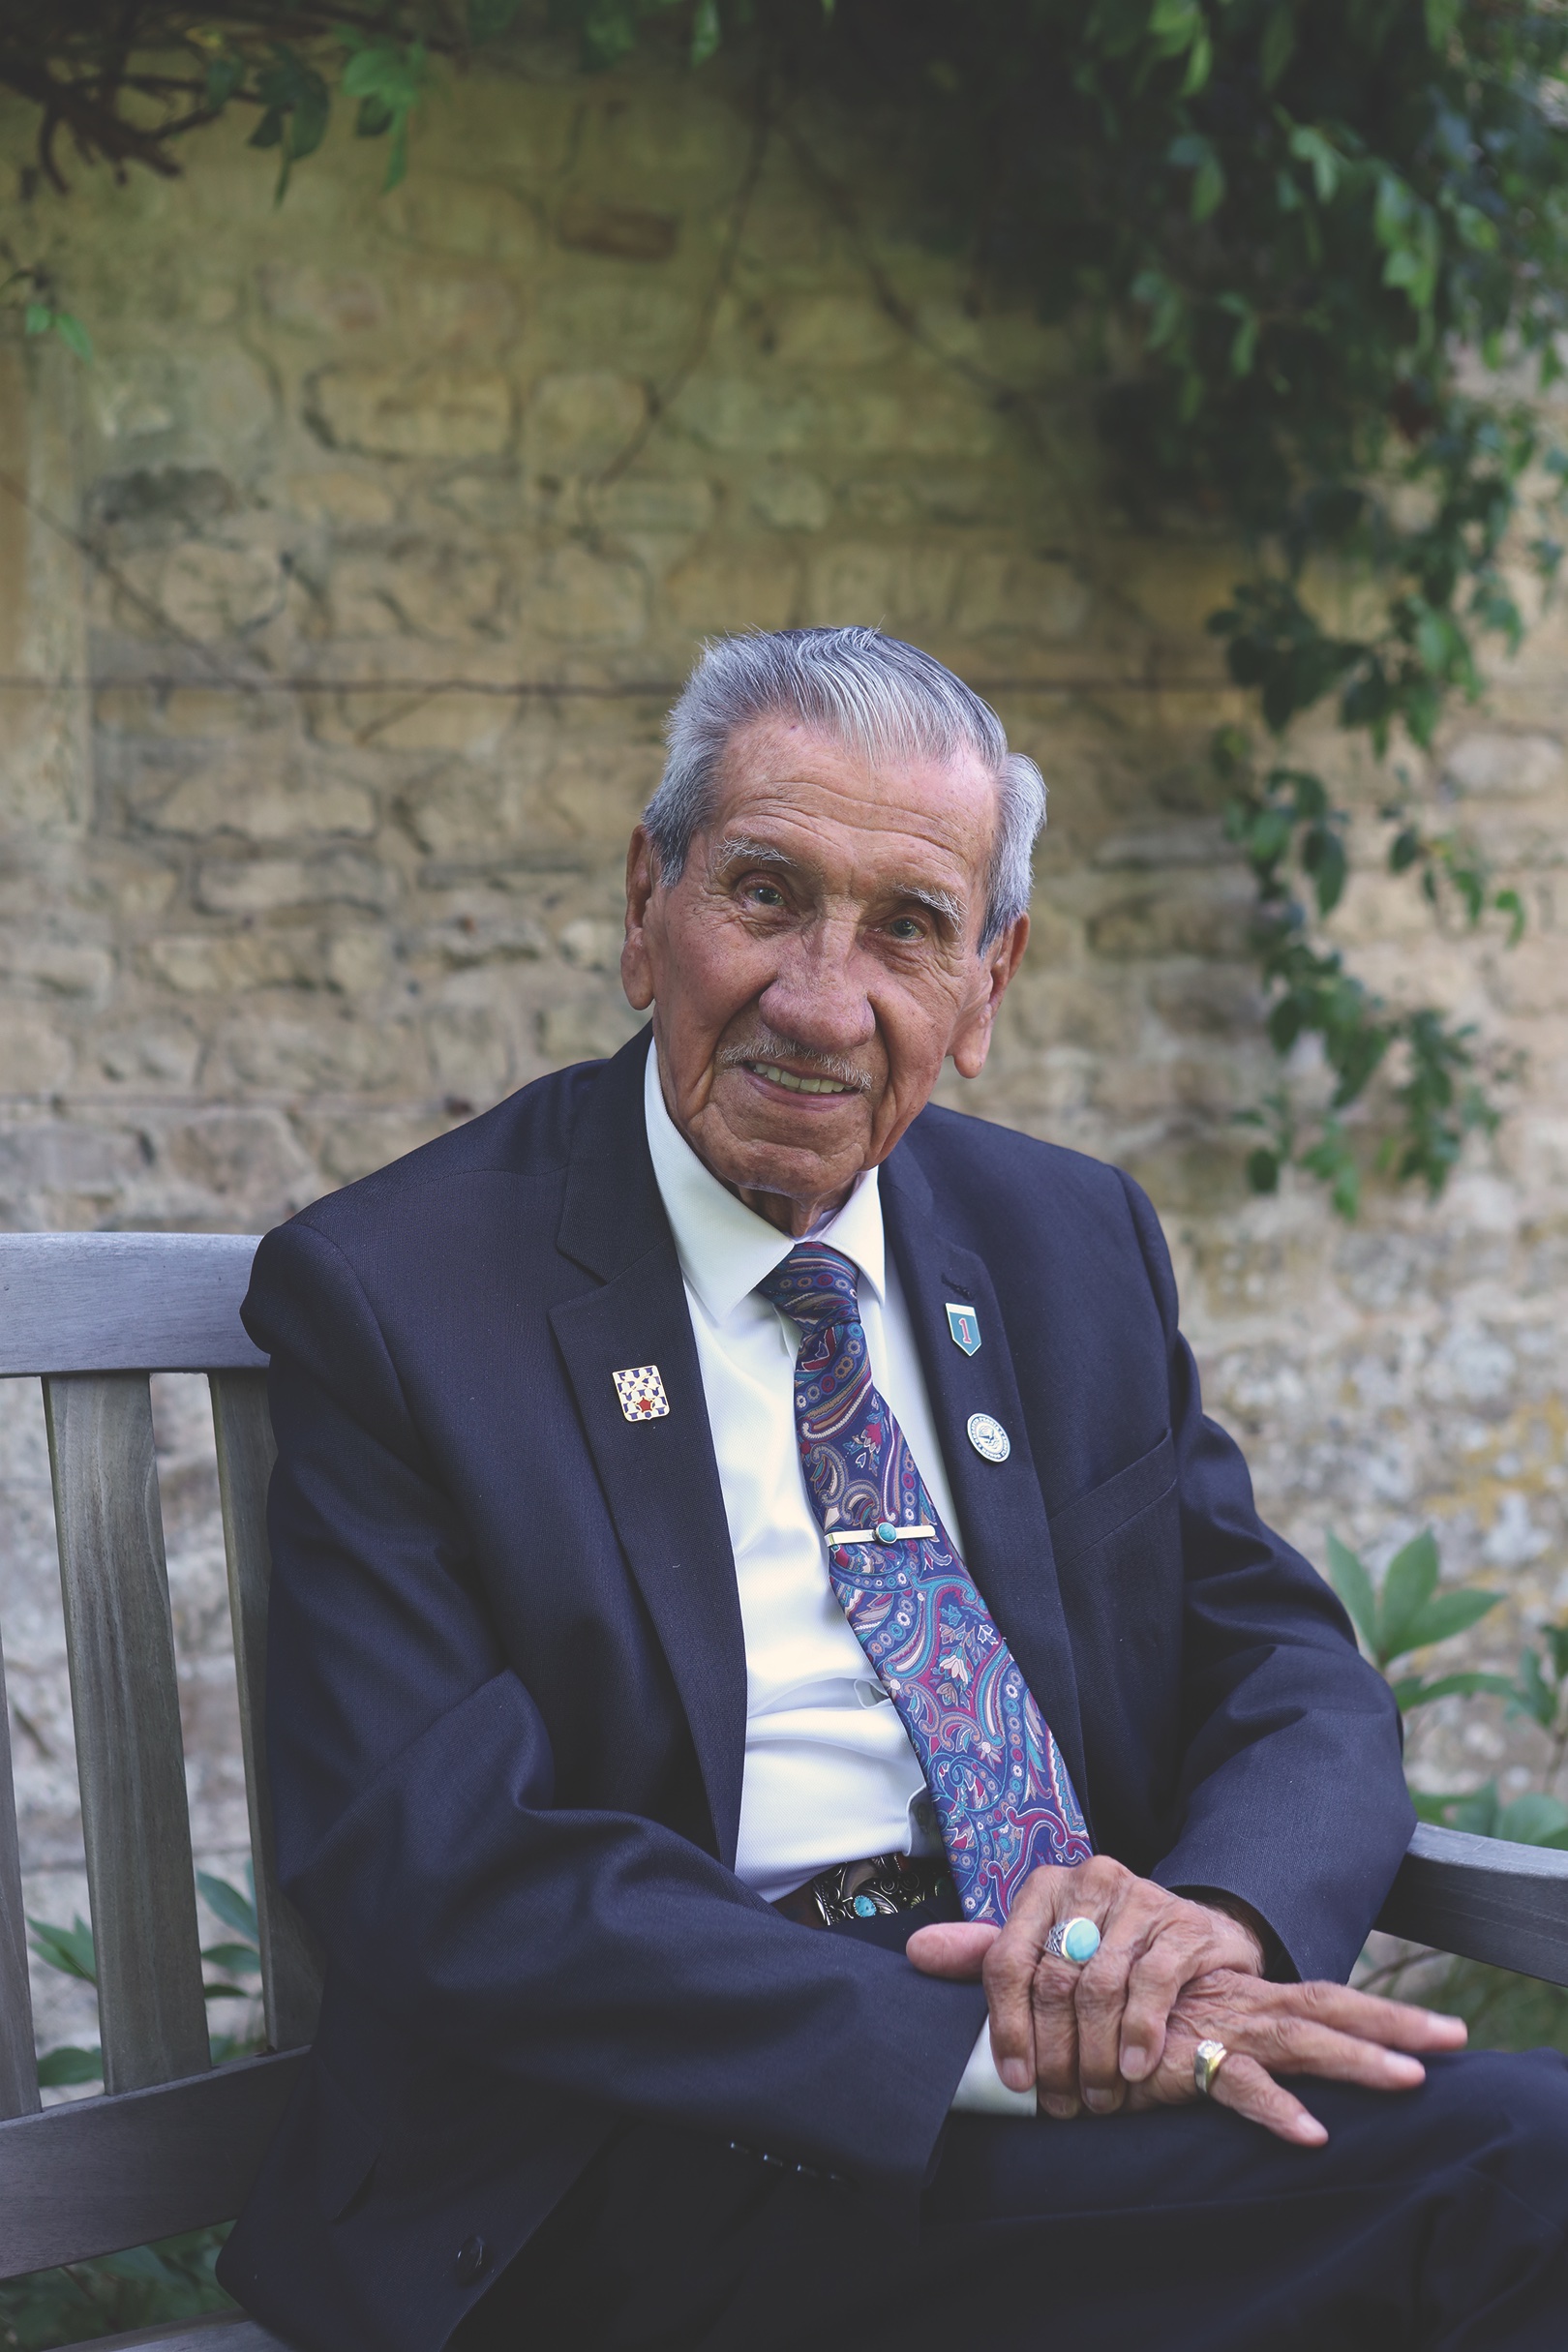 Charles Norman Shay’s Job in Normandy Was to Save Lives